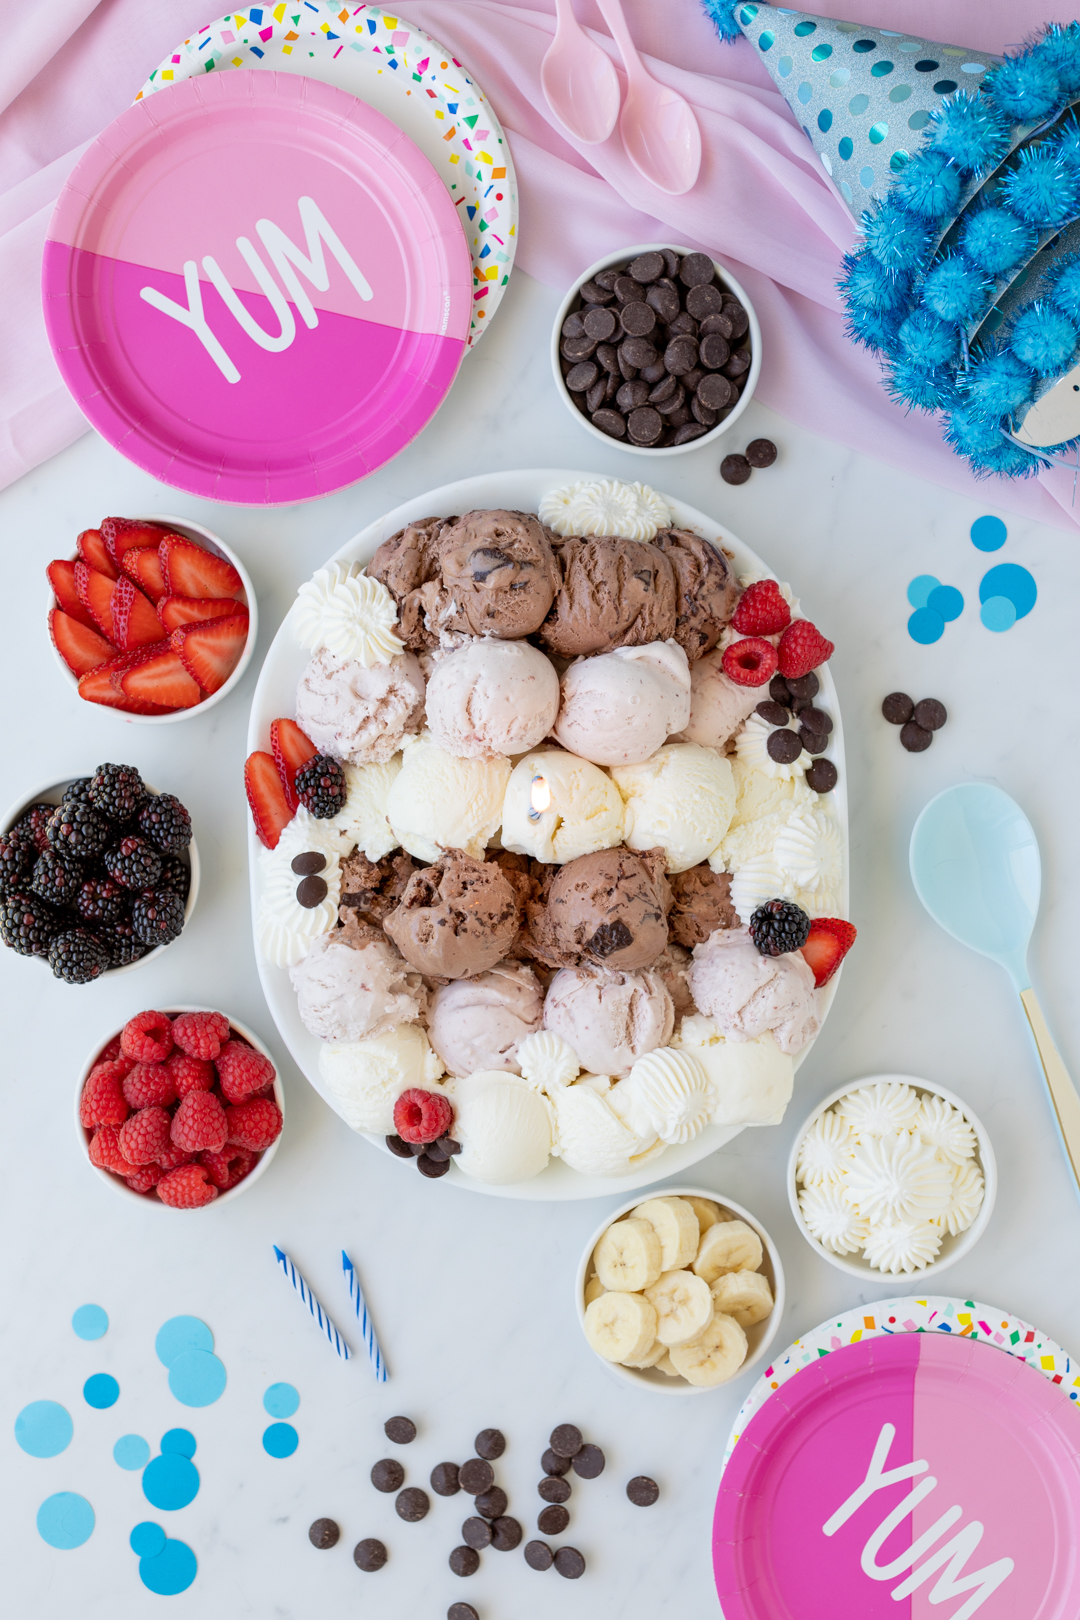 ice cream party spread with cute pink party plates and blue polka dot party hats